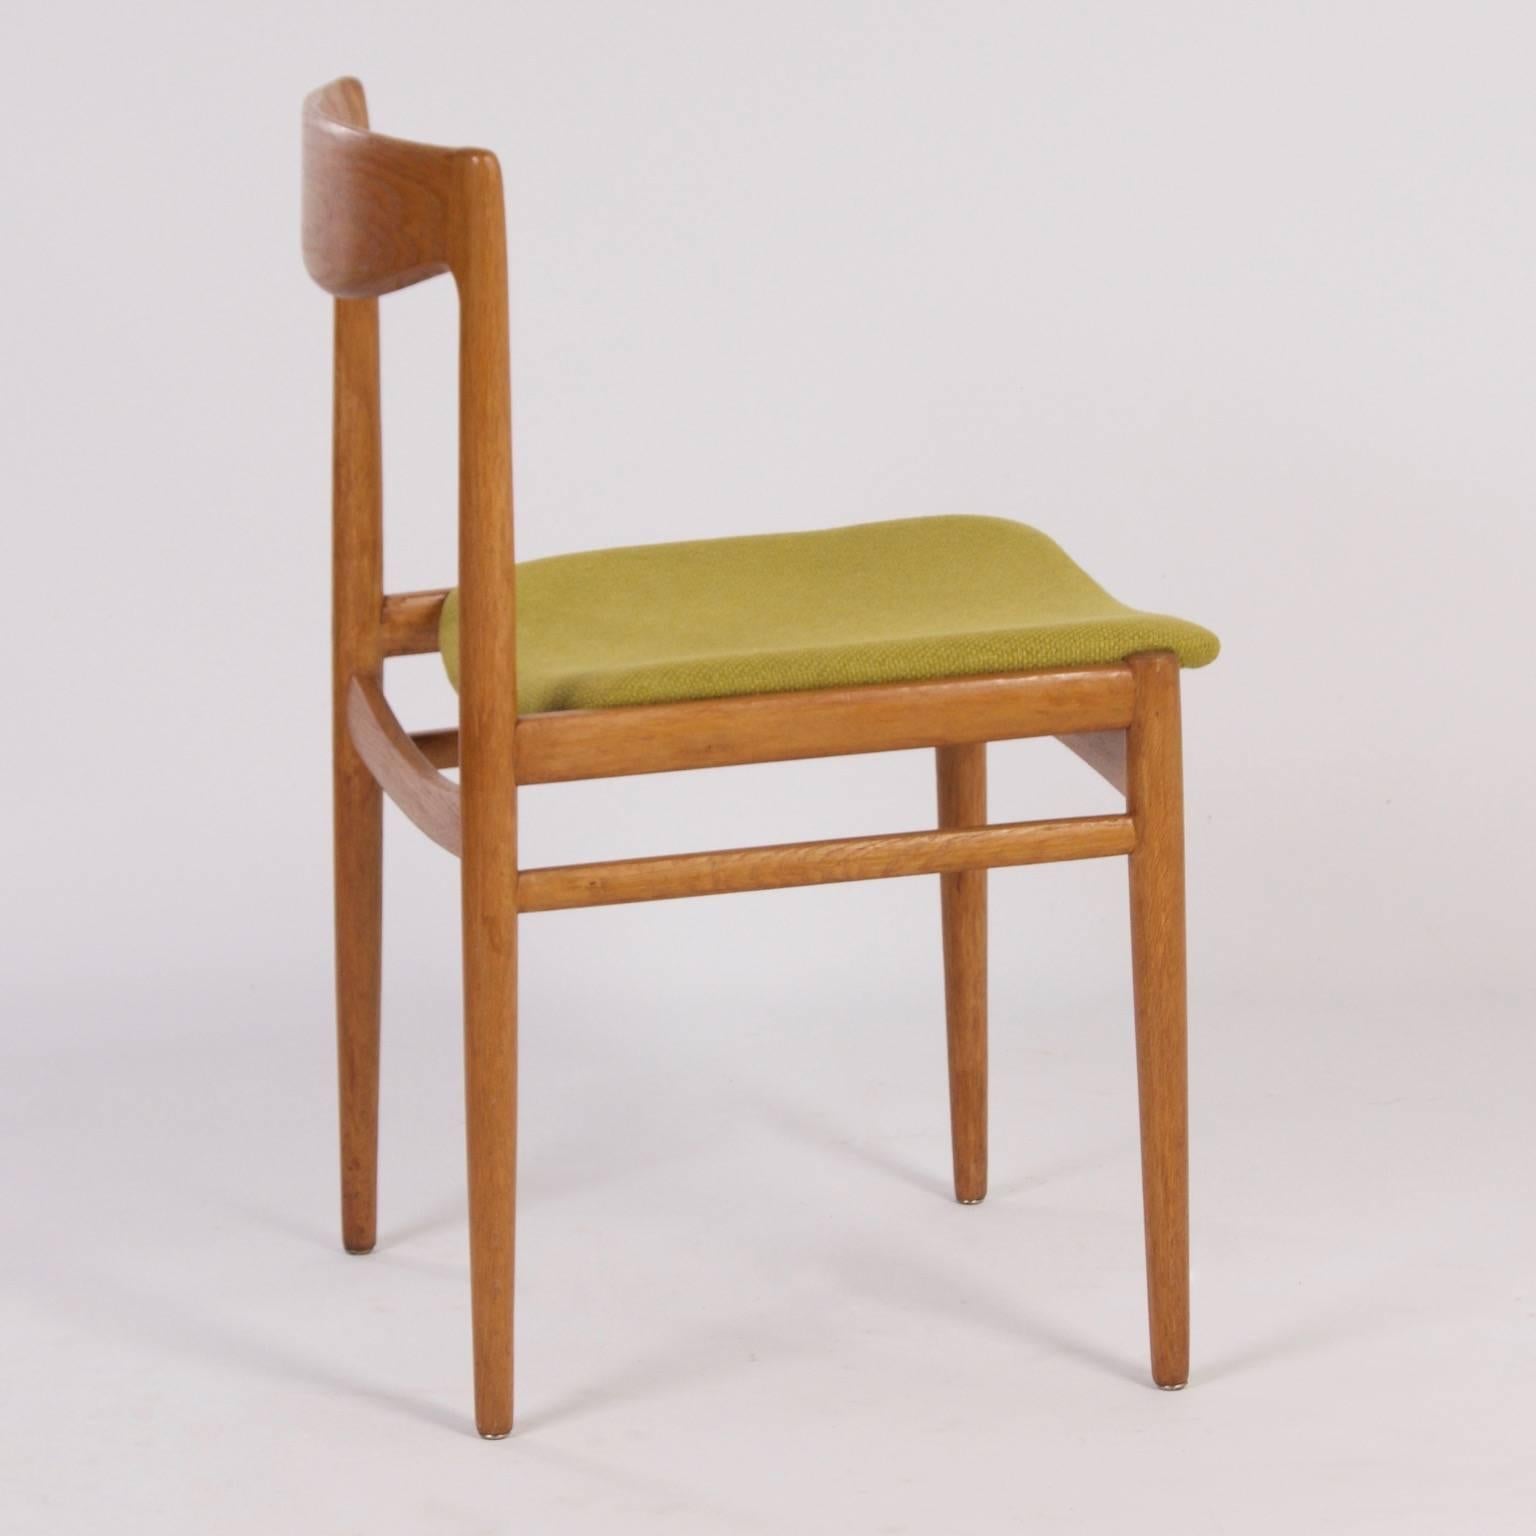 Green Danish Dining Chairs in the Style of Møller, Denmark, 1960s For Sale 2